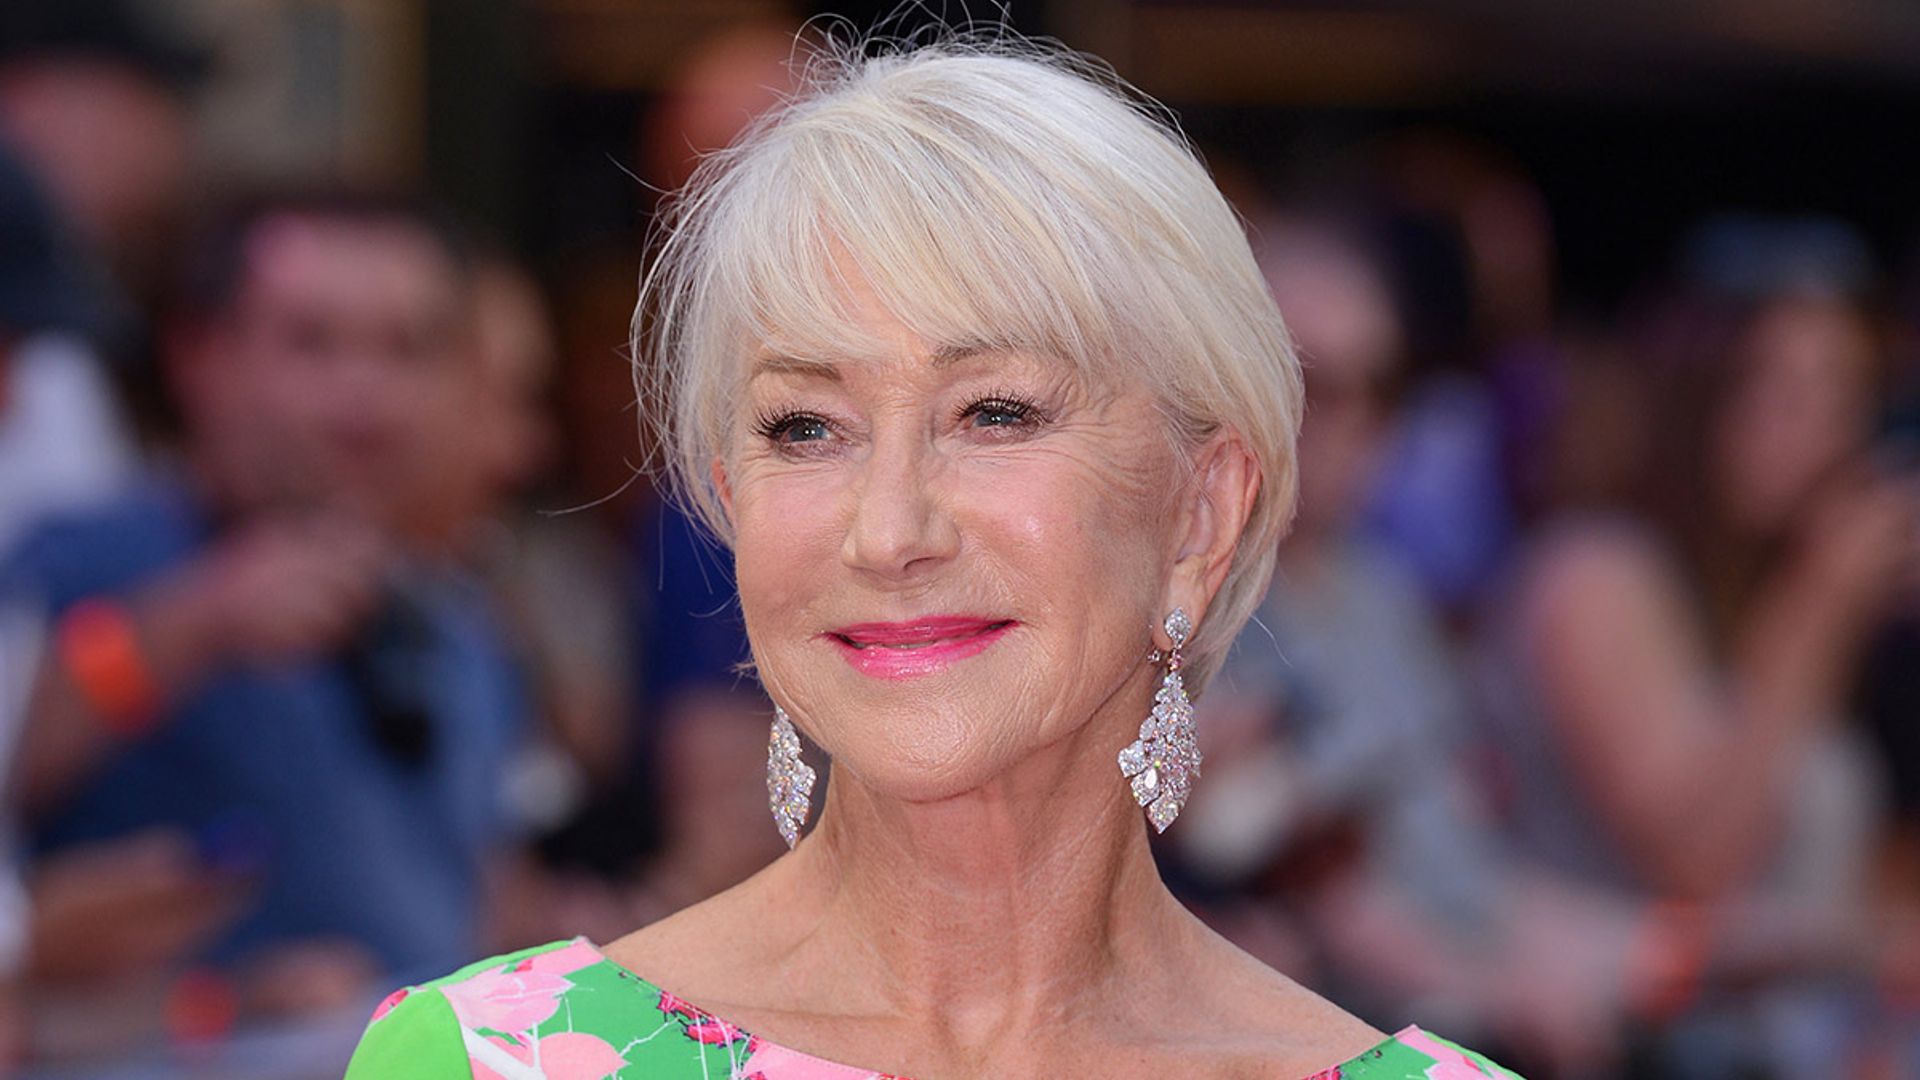 All eyes are on glam Helen Mirren at London film premiere – you have to see this dress!